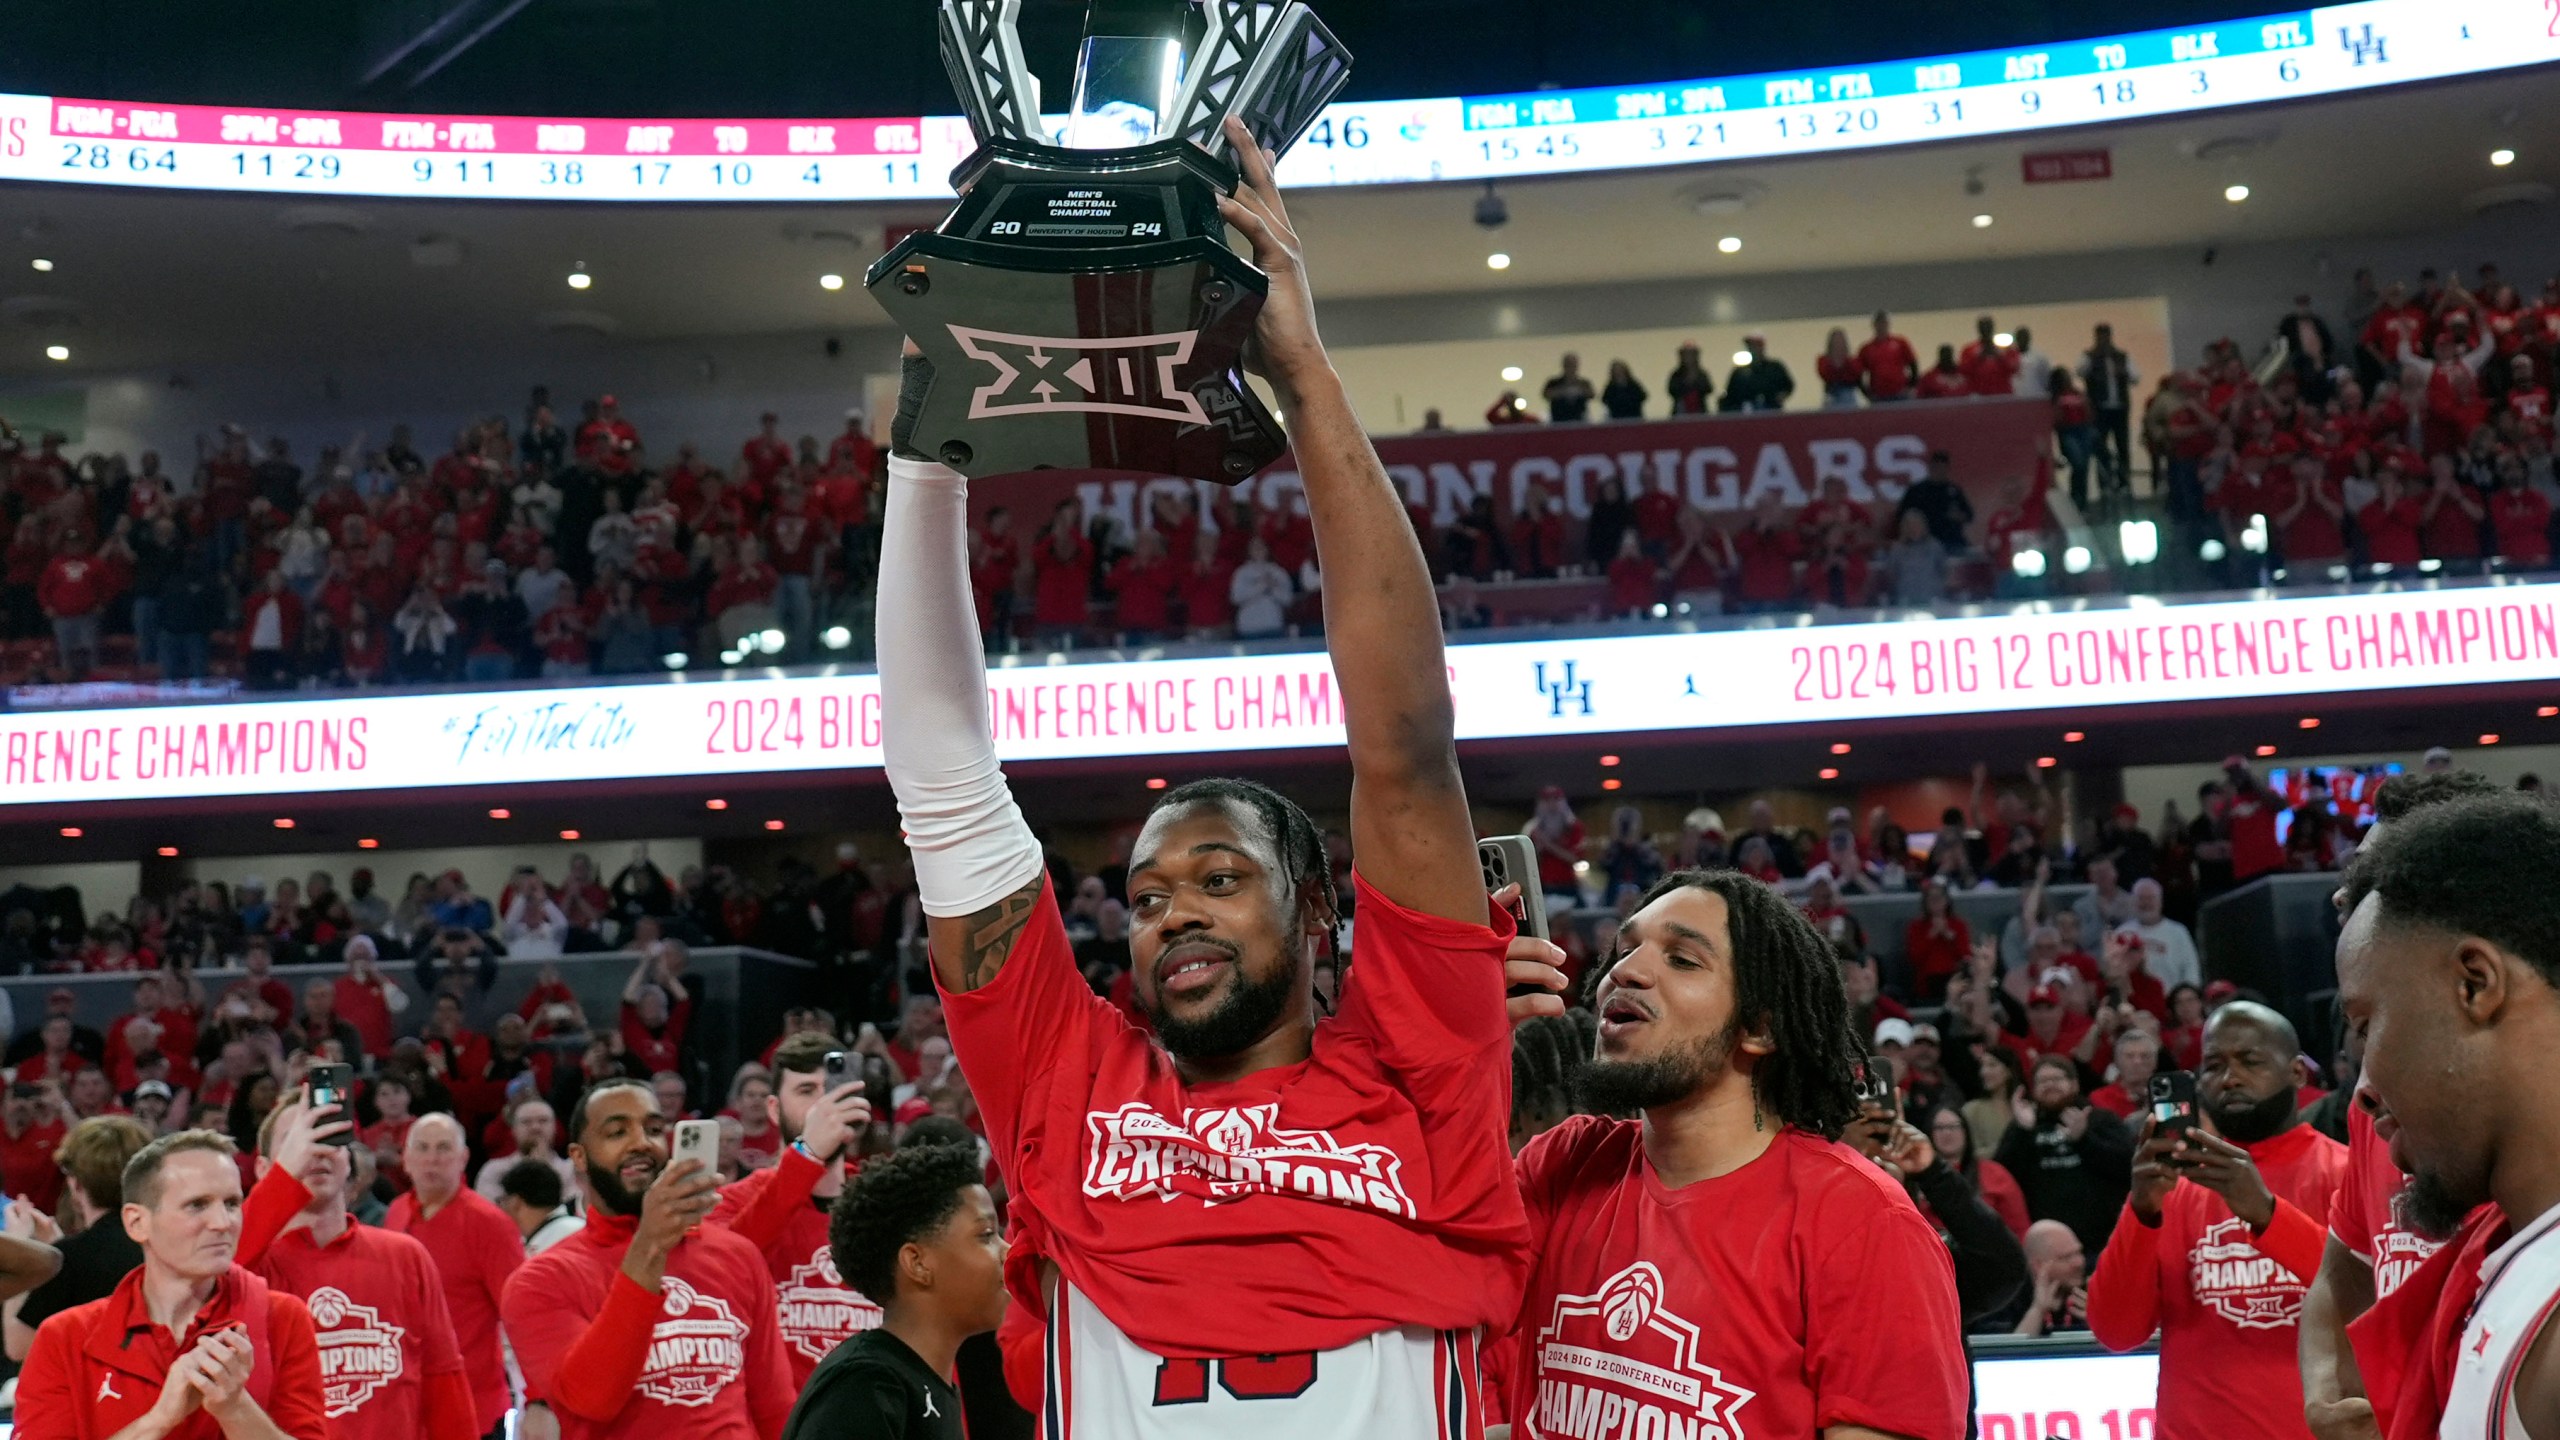 Houston's J'Wan Roberts, center, holds up the trophy after an NCAA college basketball game against Kansas Saturday, March 9, 2024, in Houston. Houston won 76-46 and finished the regular season as the Big 12 Conference Champions. (AP Photo/David J. Phillip)